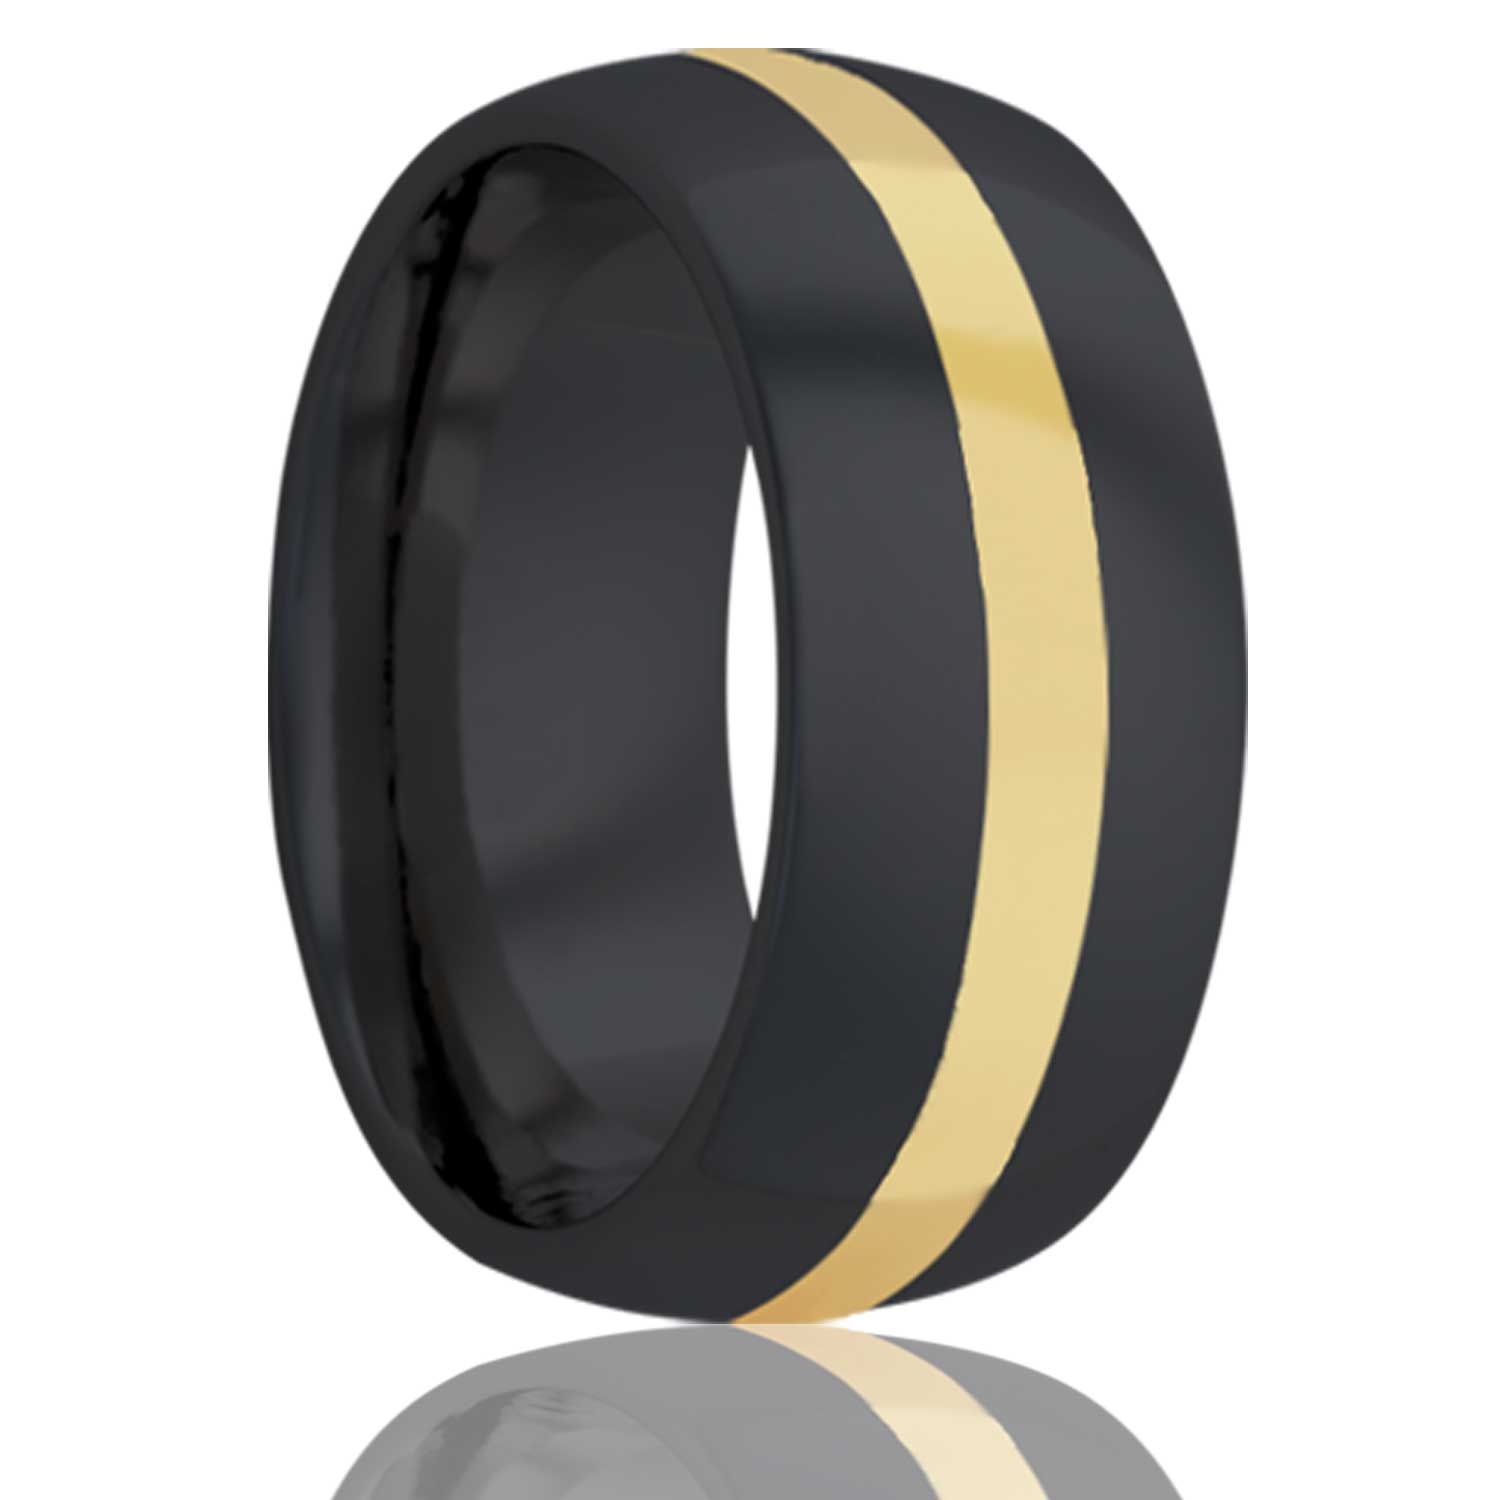 A 14k yellow gold inlay domed zirconium wedding band displayed on a neutral white background.